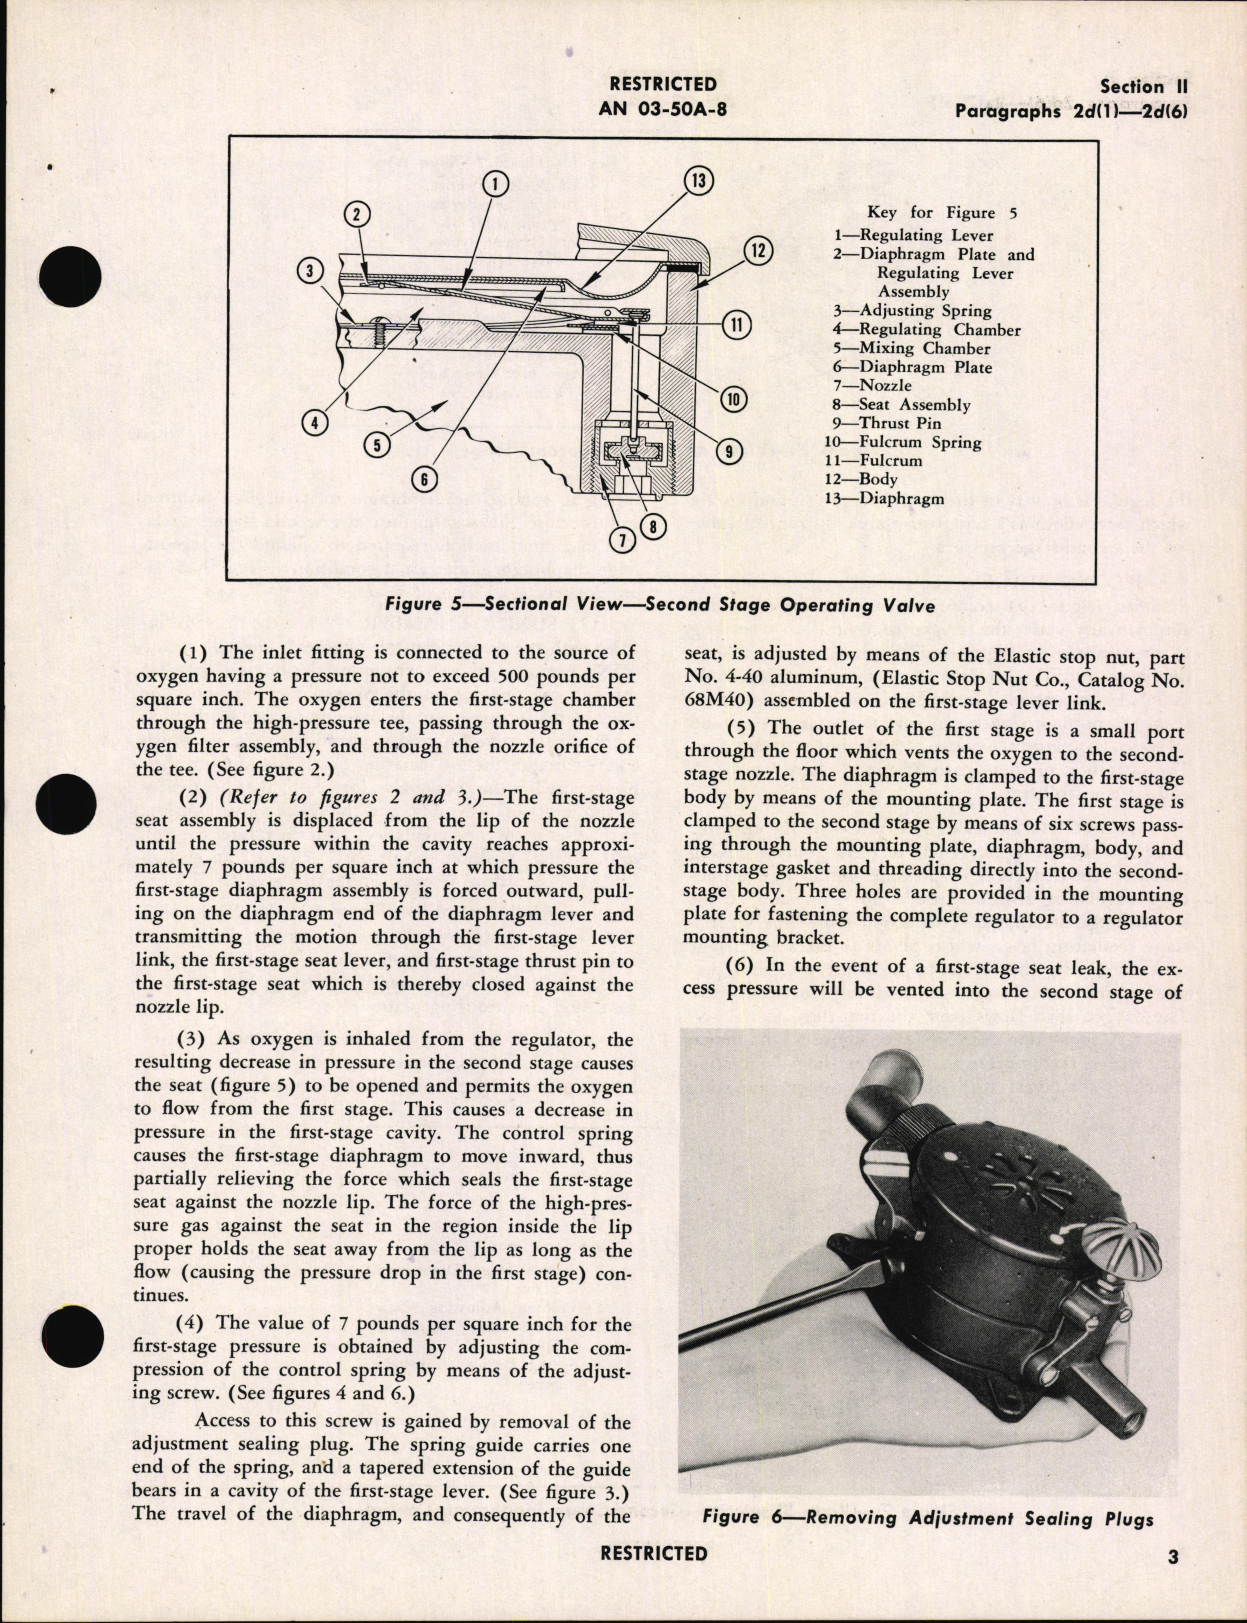 Sample page 7 from AirCorps Library document: Handbook of Instructions with Parts Catalog for Demand Oxygen Regulator Type A-12